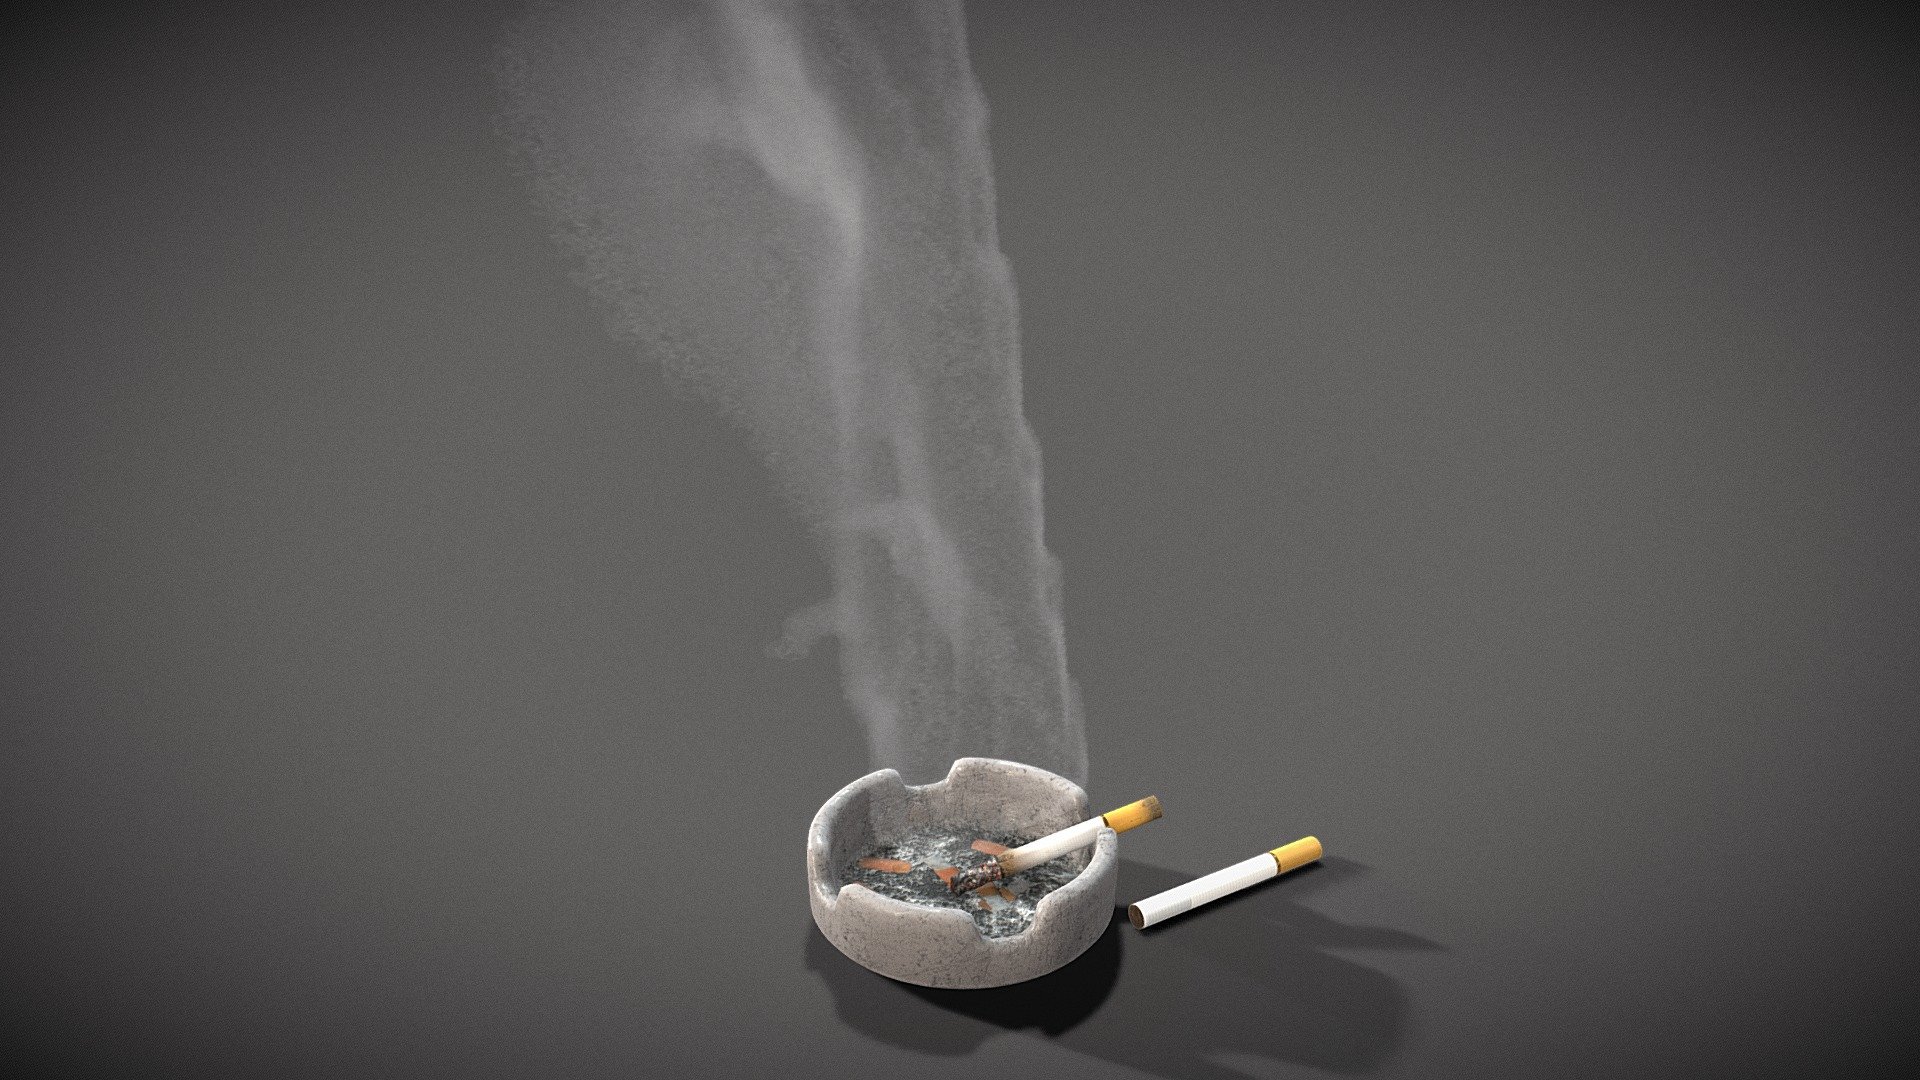 A simple ashtray with butts and ash and two cigarettes, one lit and the other unused.  Has a smoke texture rising up.

Handy background prop for any sort of environment.  

PBR textures @2k - Ashtray and cigarette - Buy Royalty Free 3D model by Sousinho 3d model